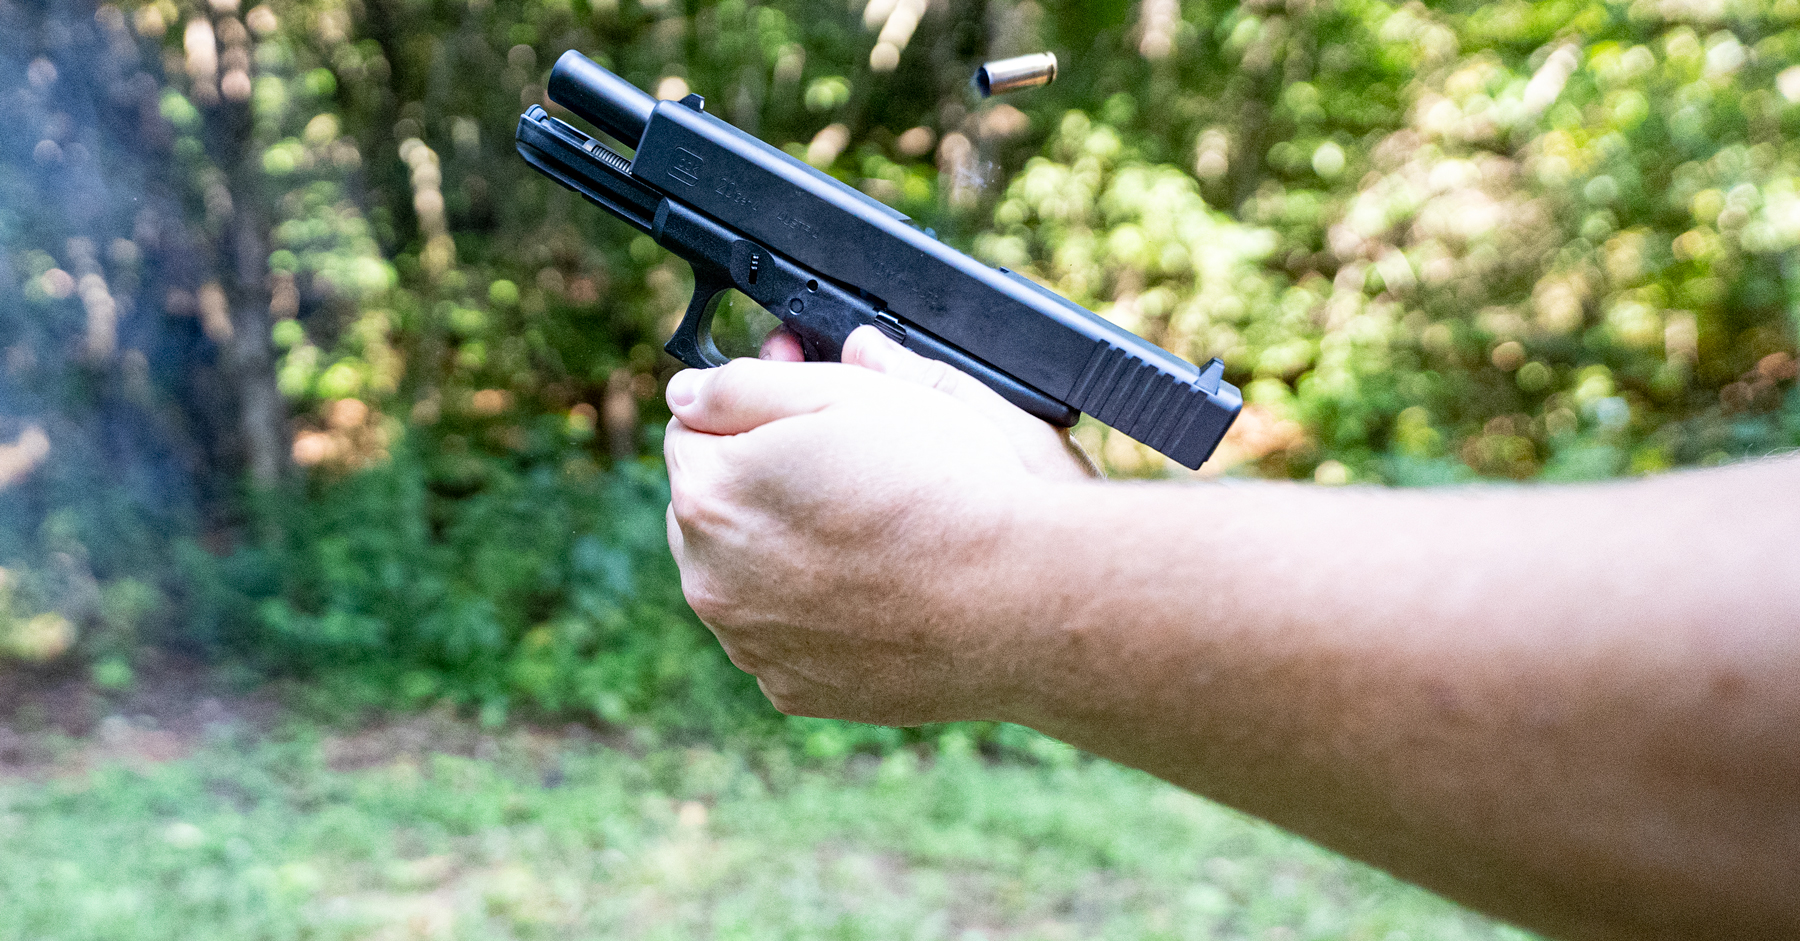 A pistol's recoil demonstrated at a shooting range